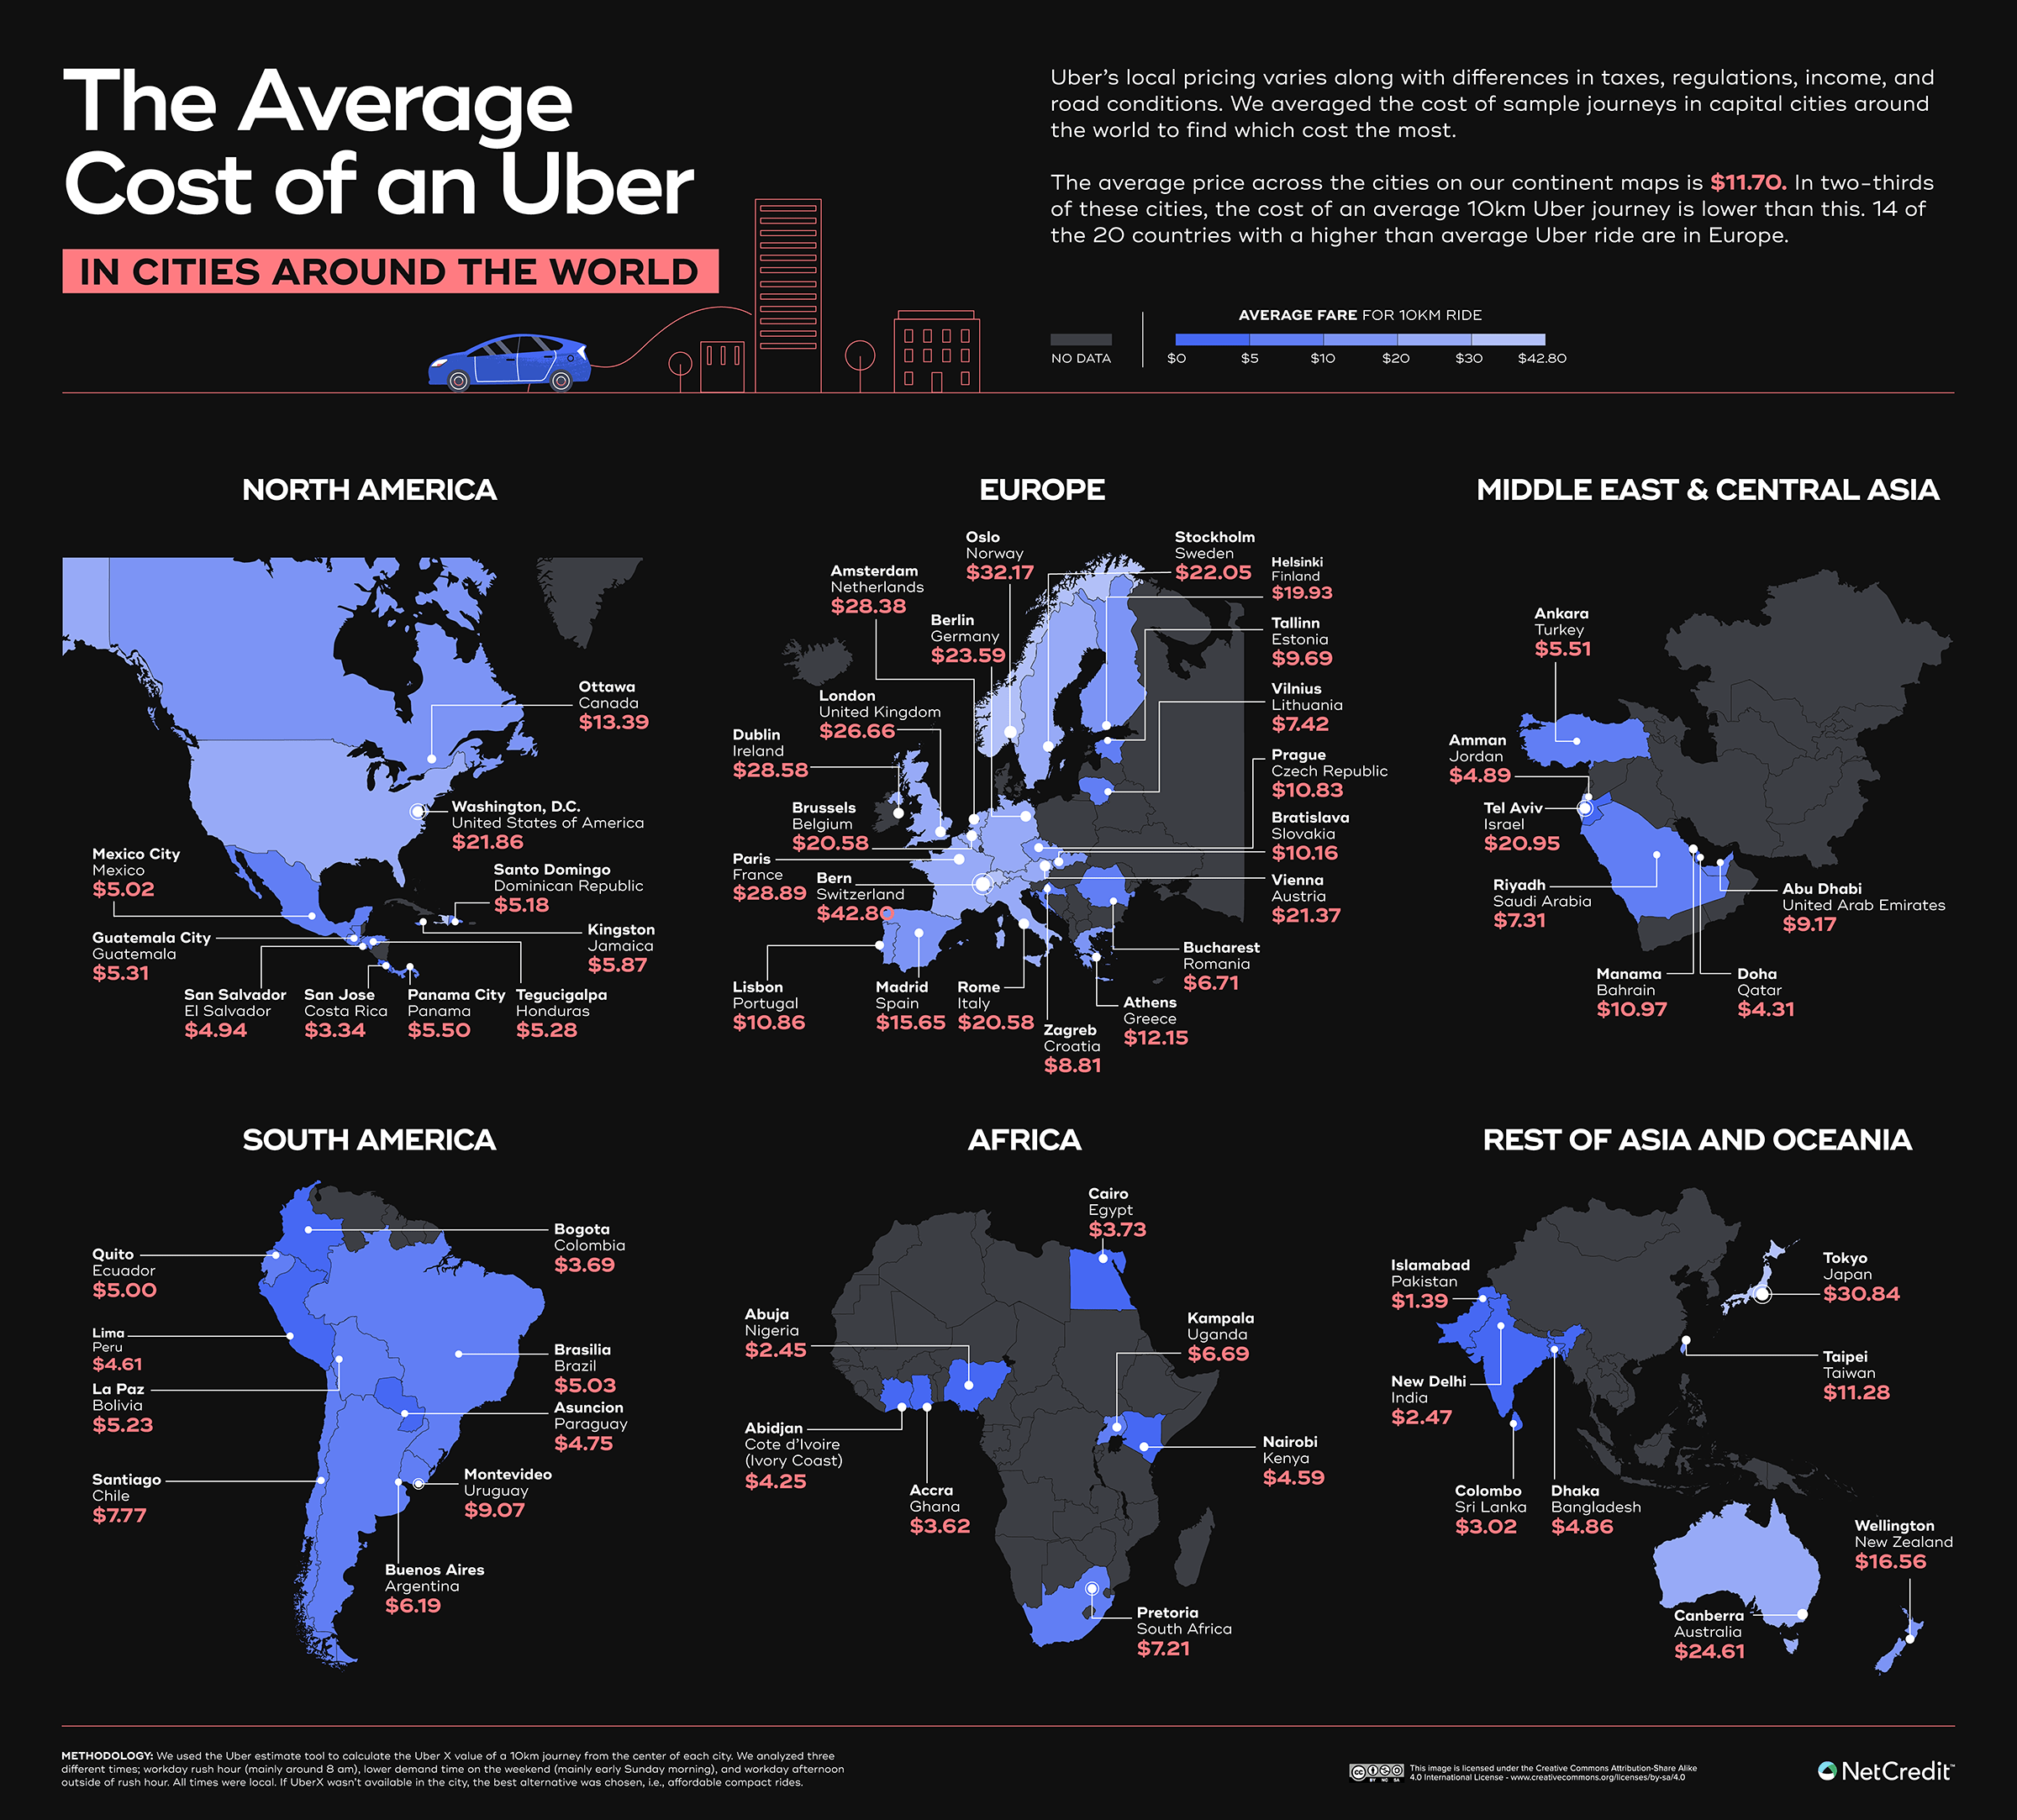 Cost of an Uber World Map